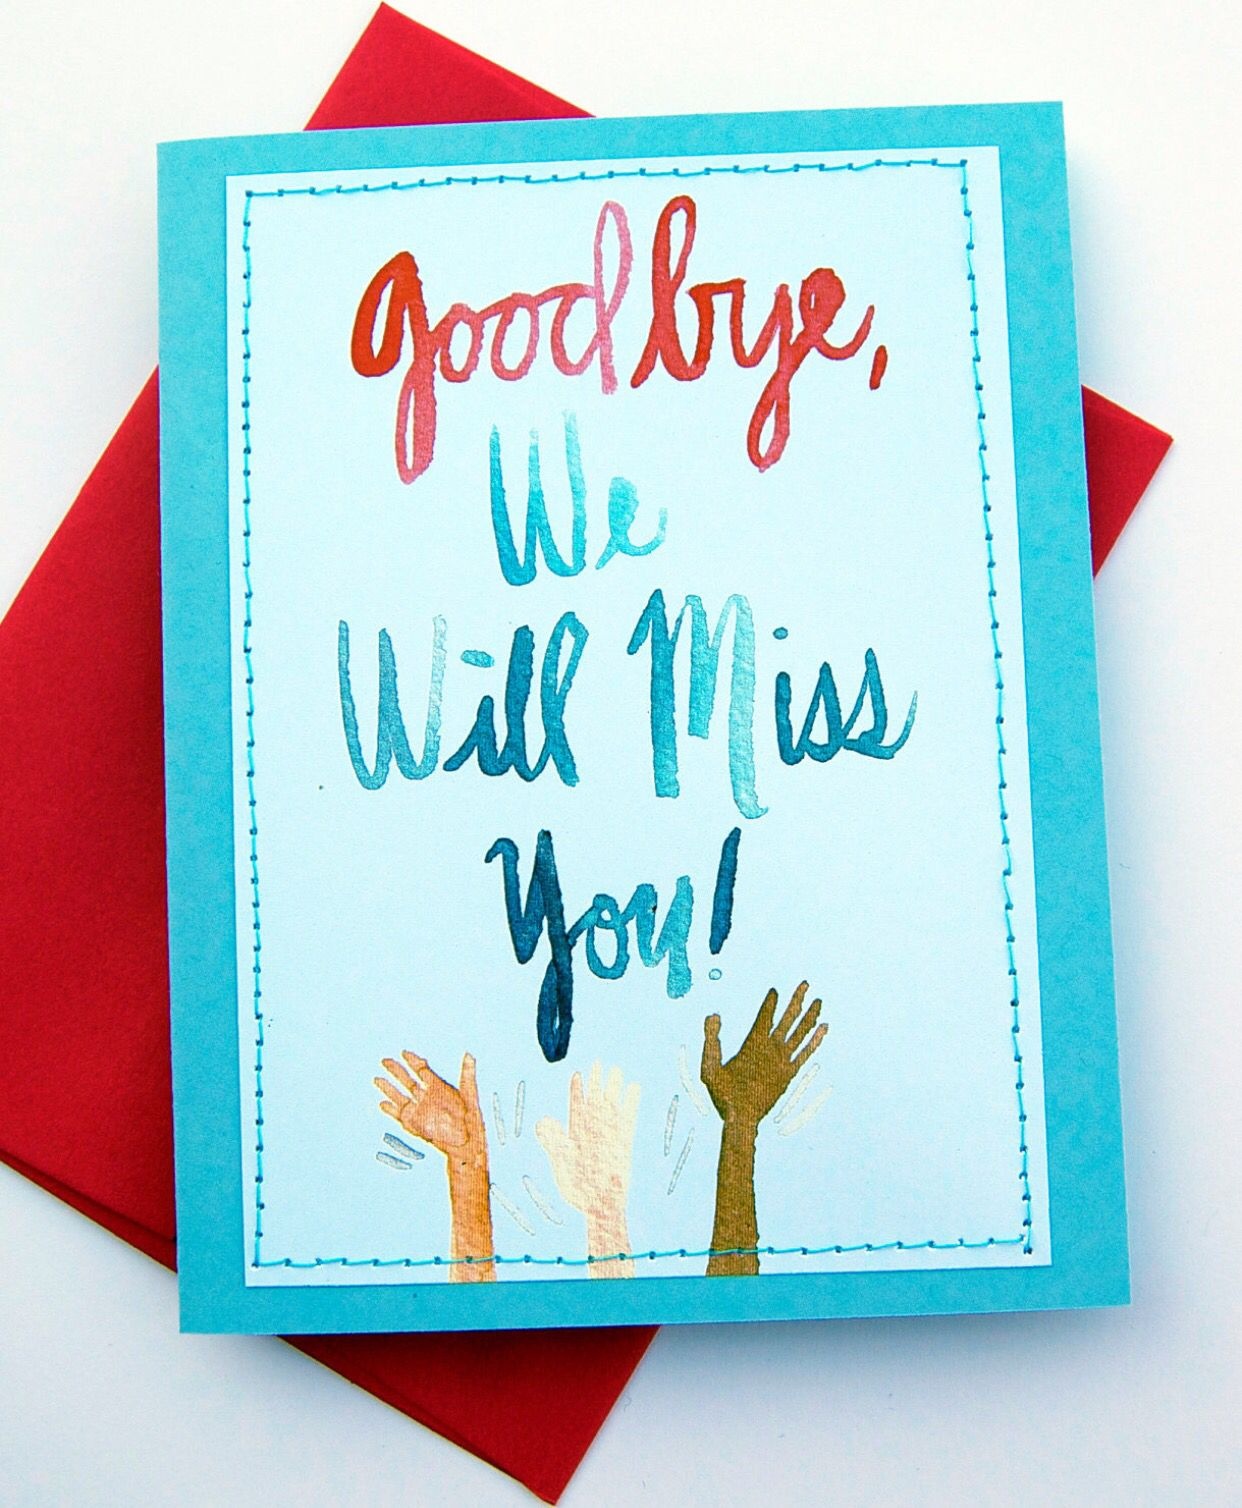 Free Printable We Will Miss You Greeting Cards Free Printable